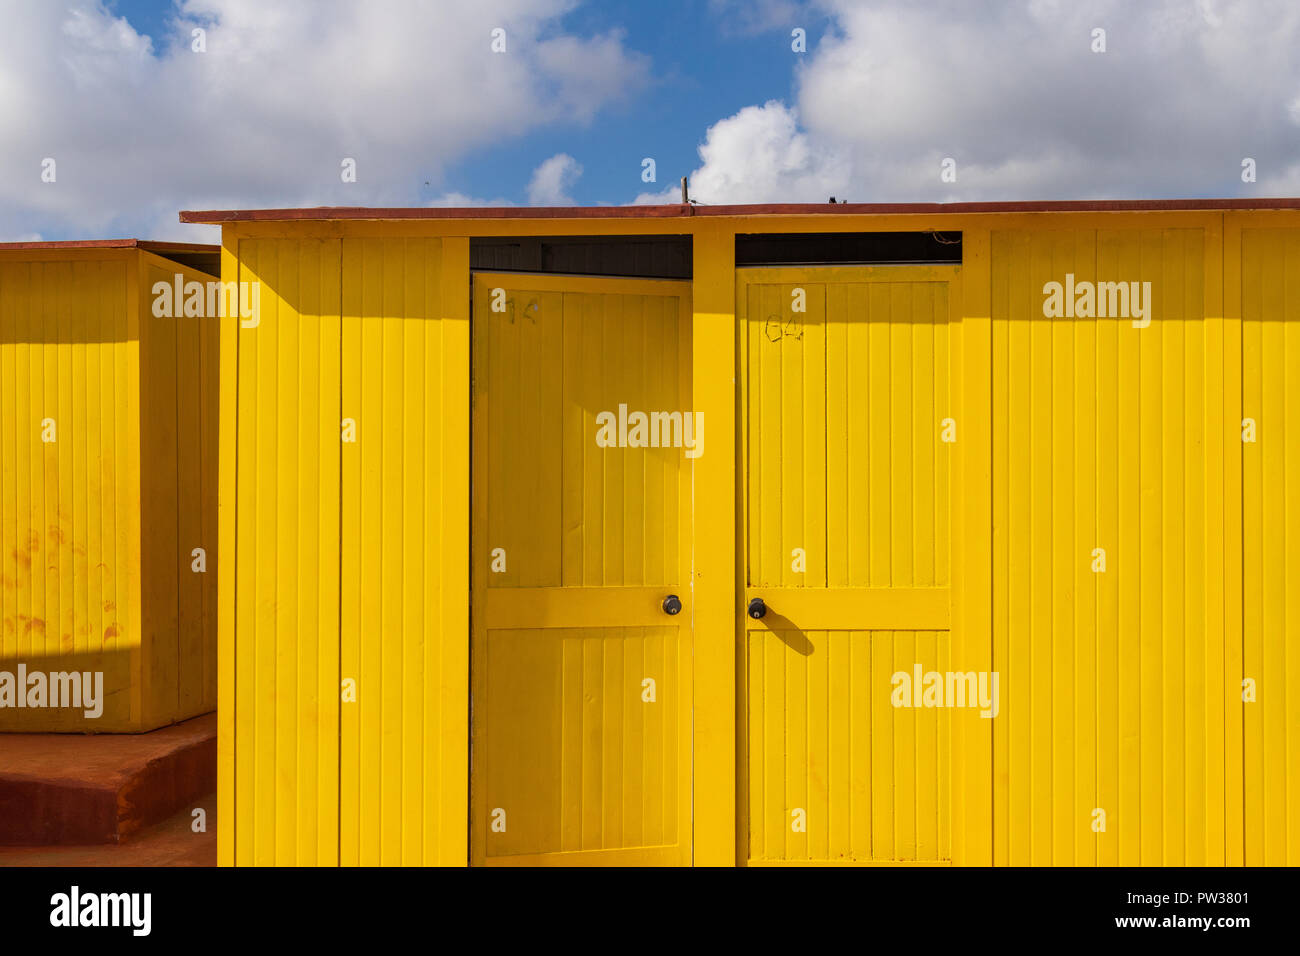 Beautiful yellow Bathing houses on the sandy beach. Empty shelters on a sunny but moody day. Seaside architecture, colored paint, maze-like labyrint. Stock Photo